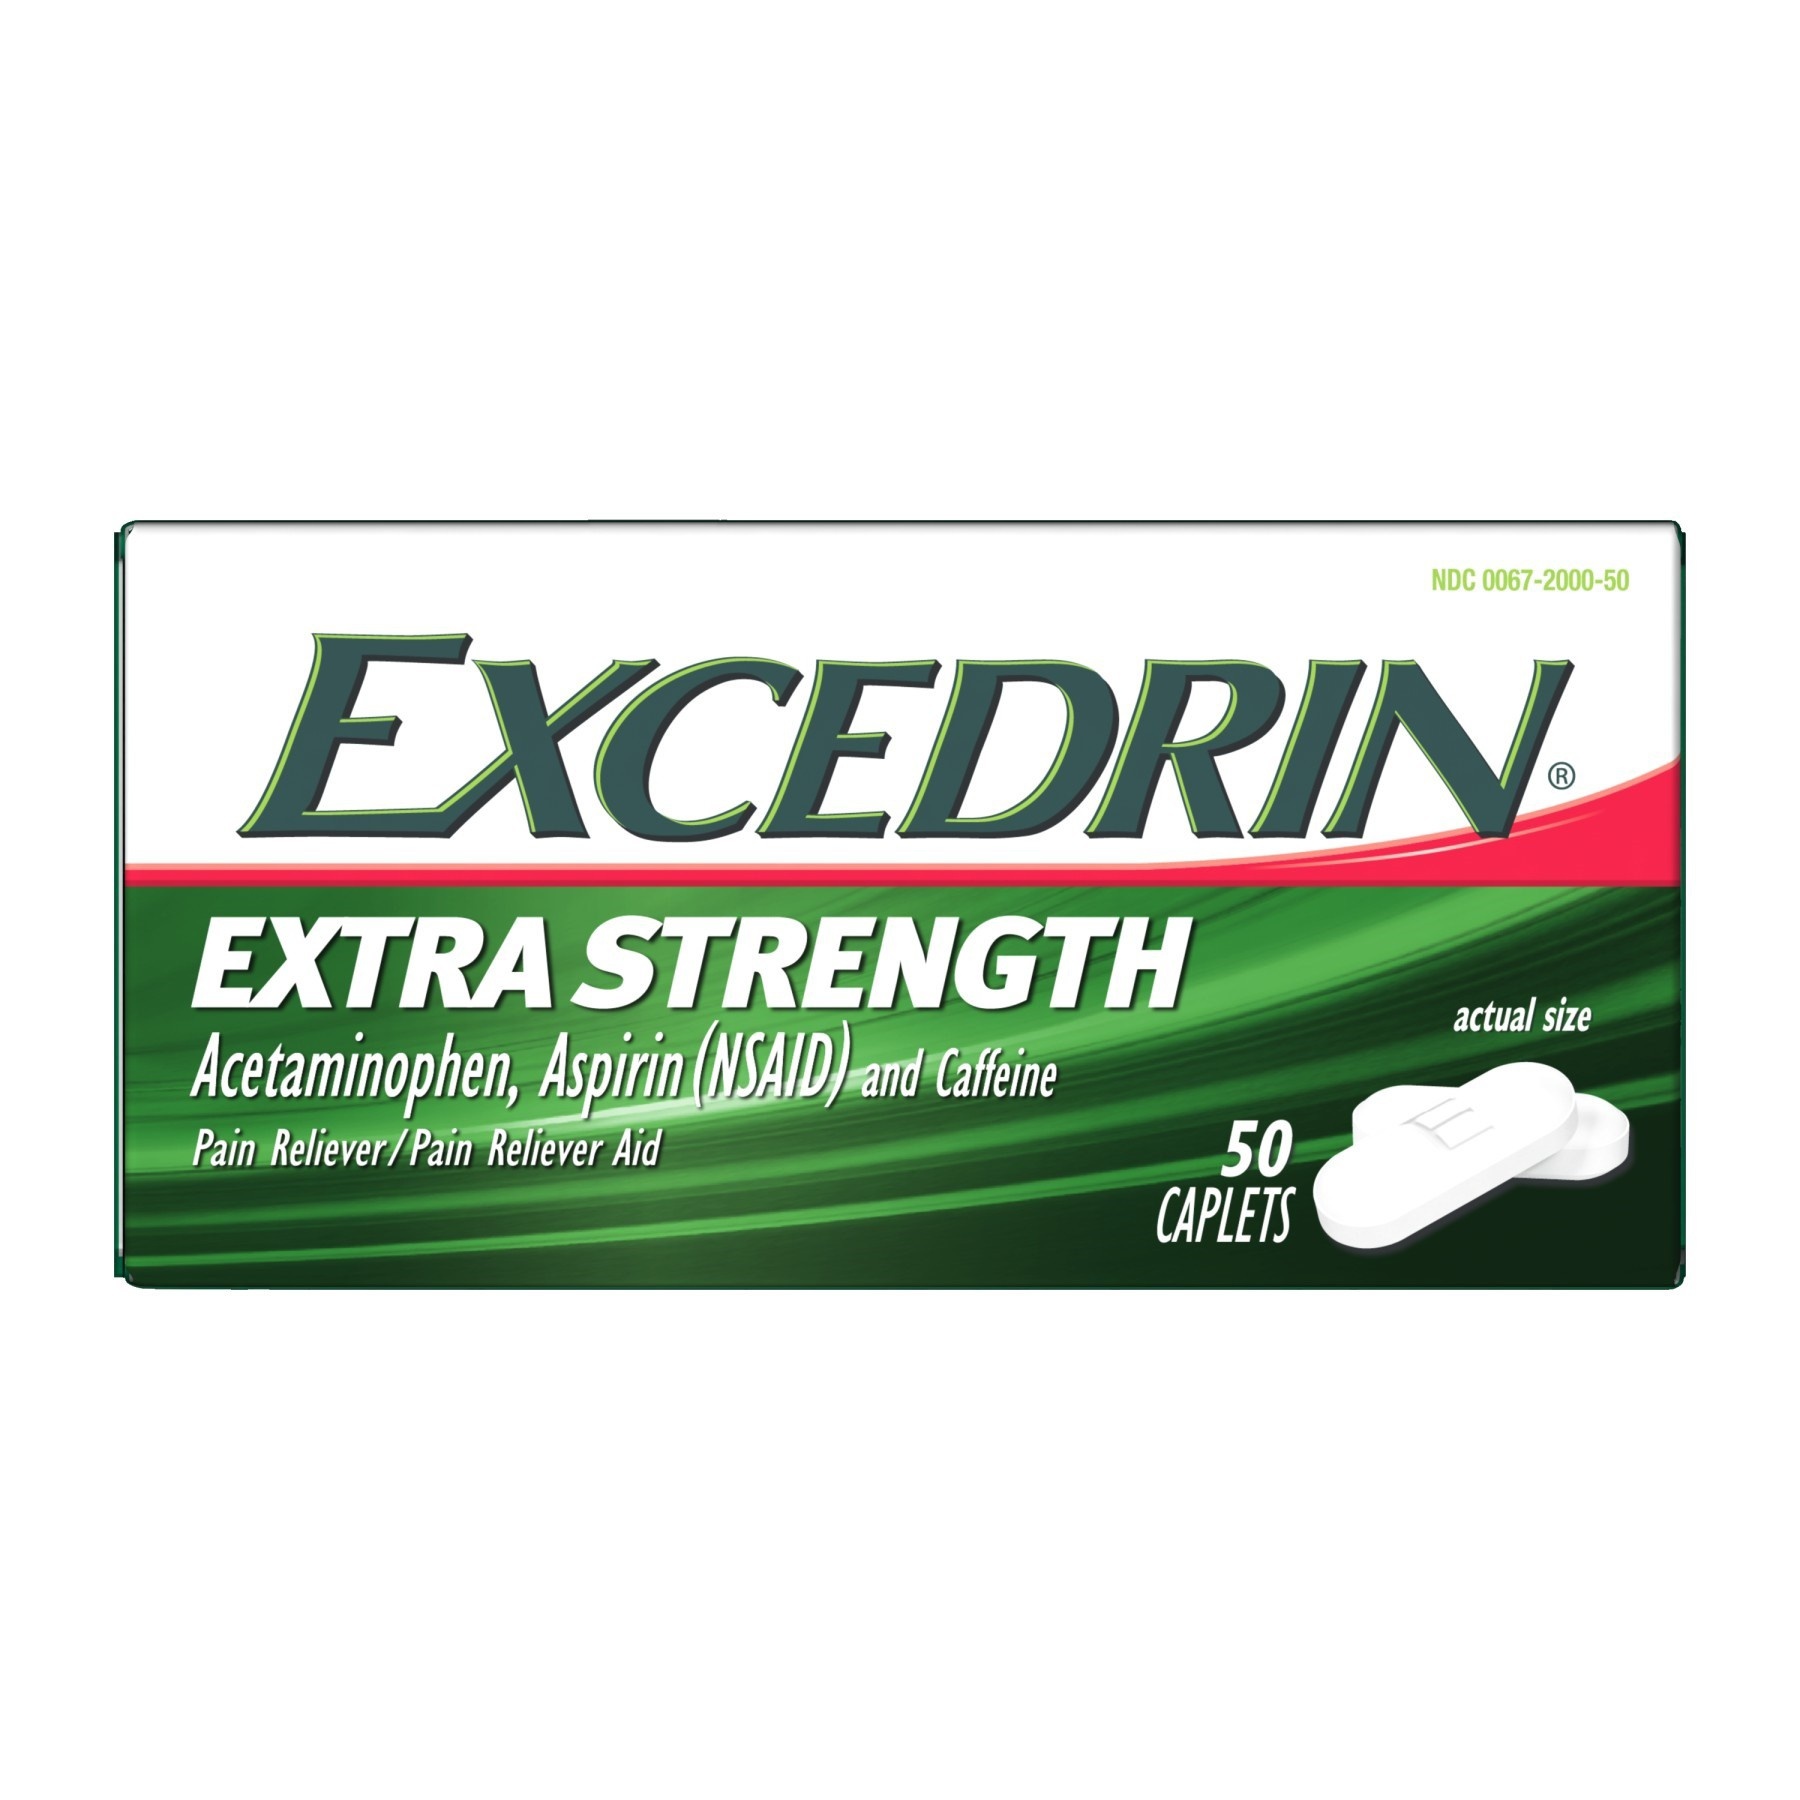 slide 1 of 6, Excedrin Extra Strength Pain Reliever Caplets - Acetaminophen/Aspirin (NSAID), 50 ct